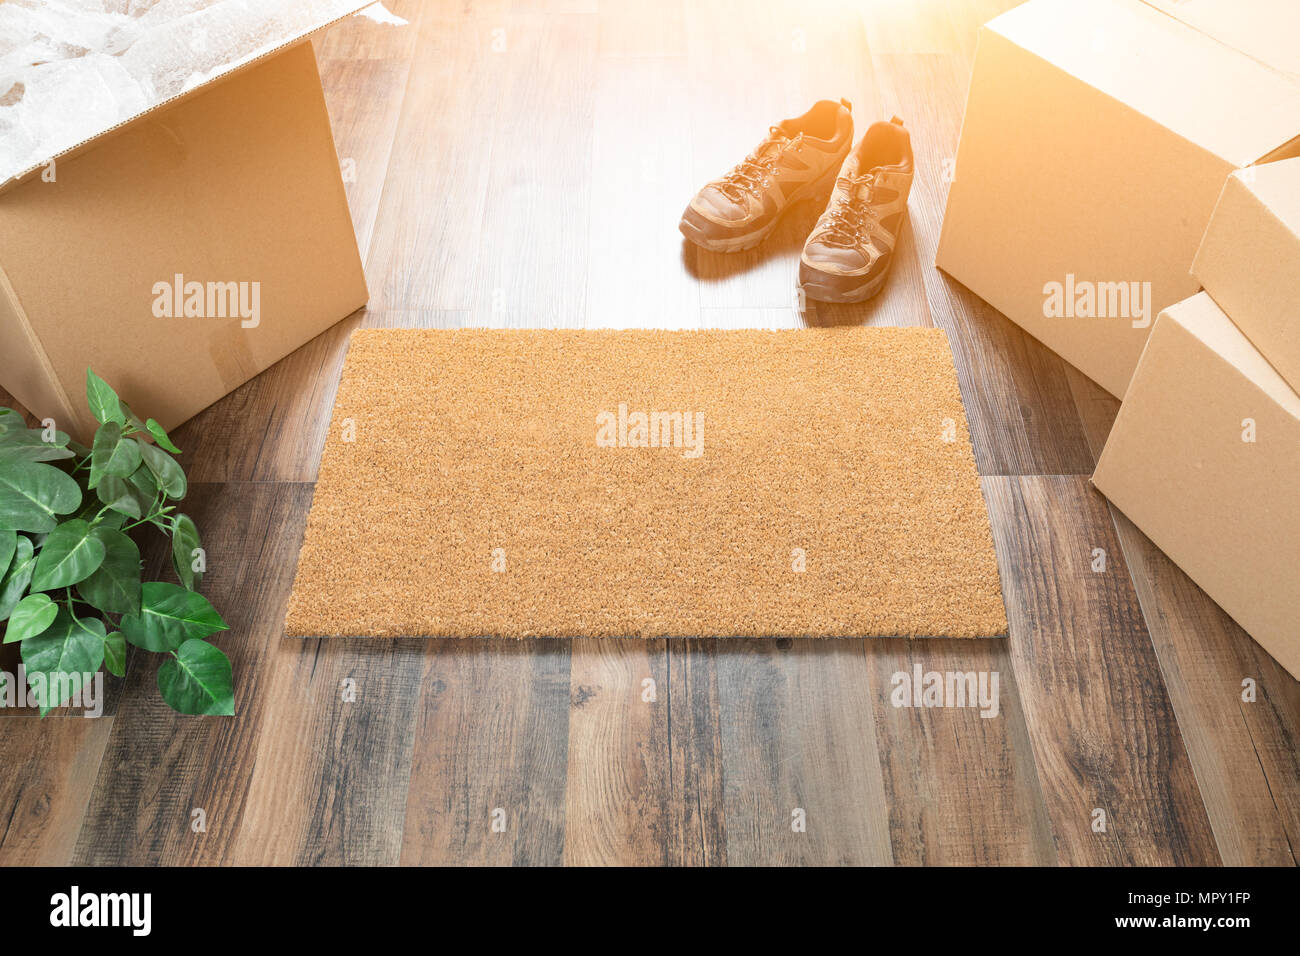 Blank Welcome Mat, Moving Boxes, Shoes and Plant on Hard Wood Floors. Stock Photo